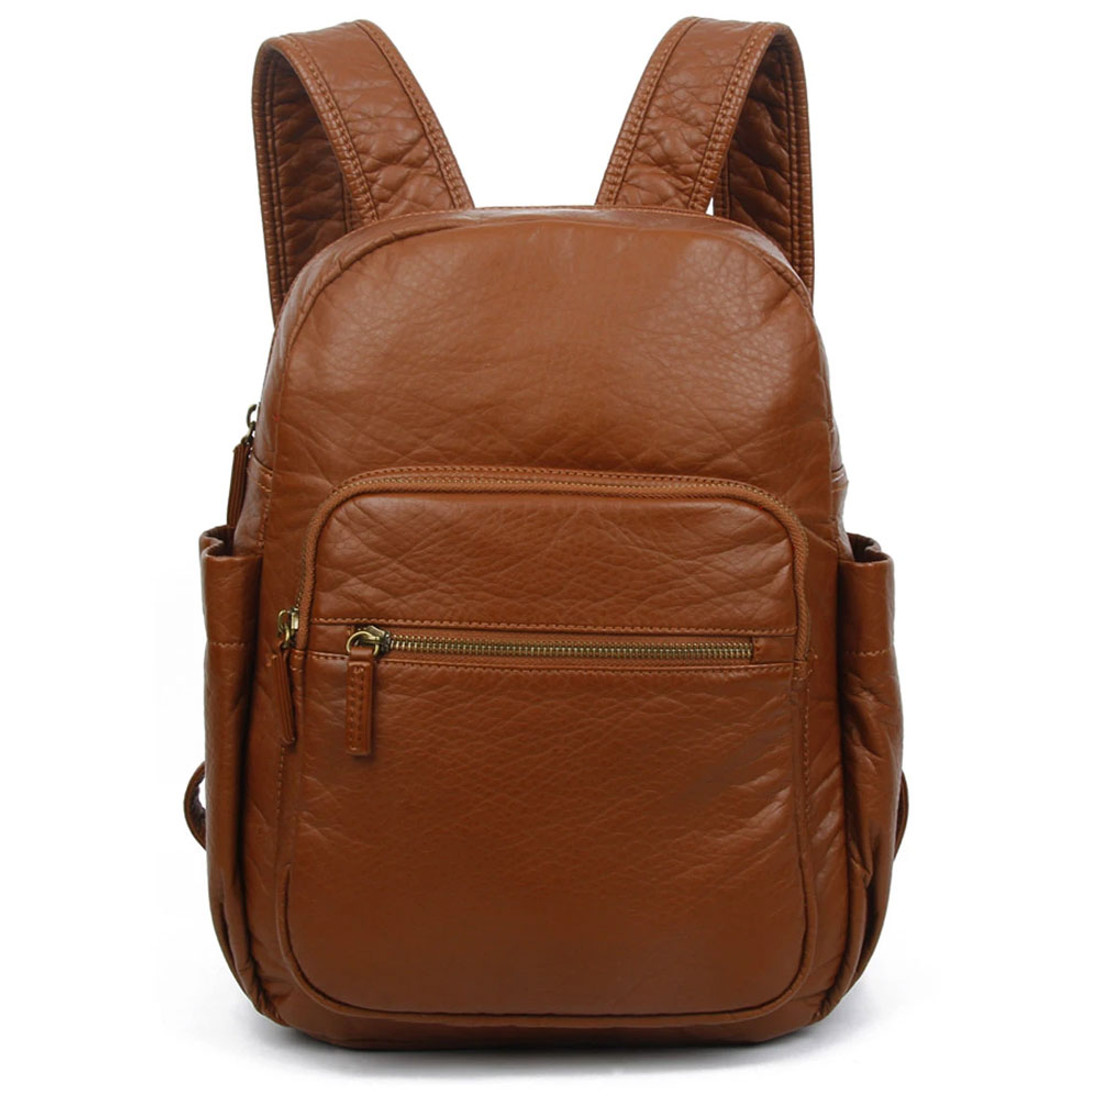 Brown Backpack Purse